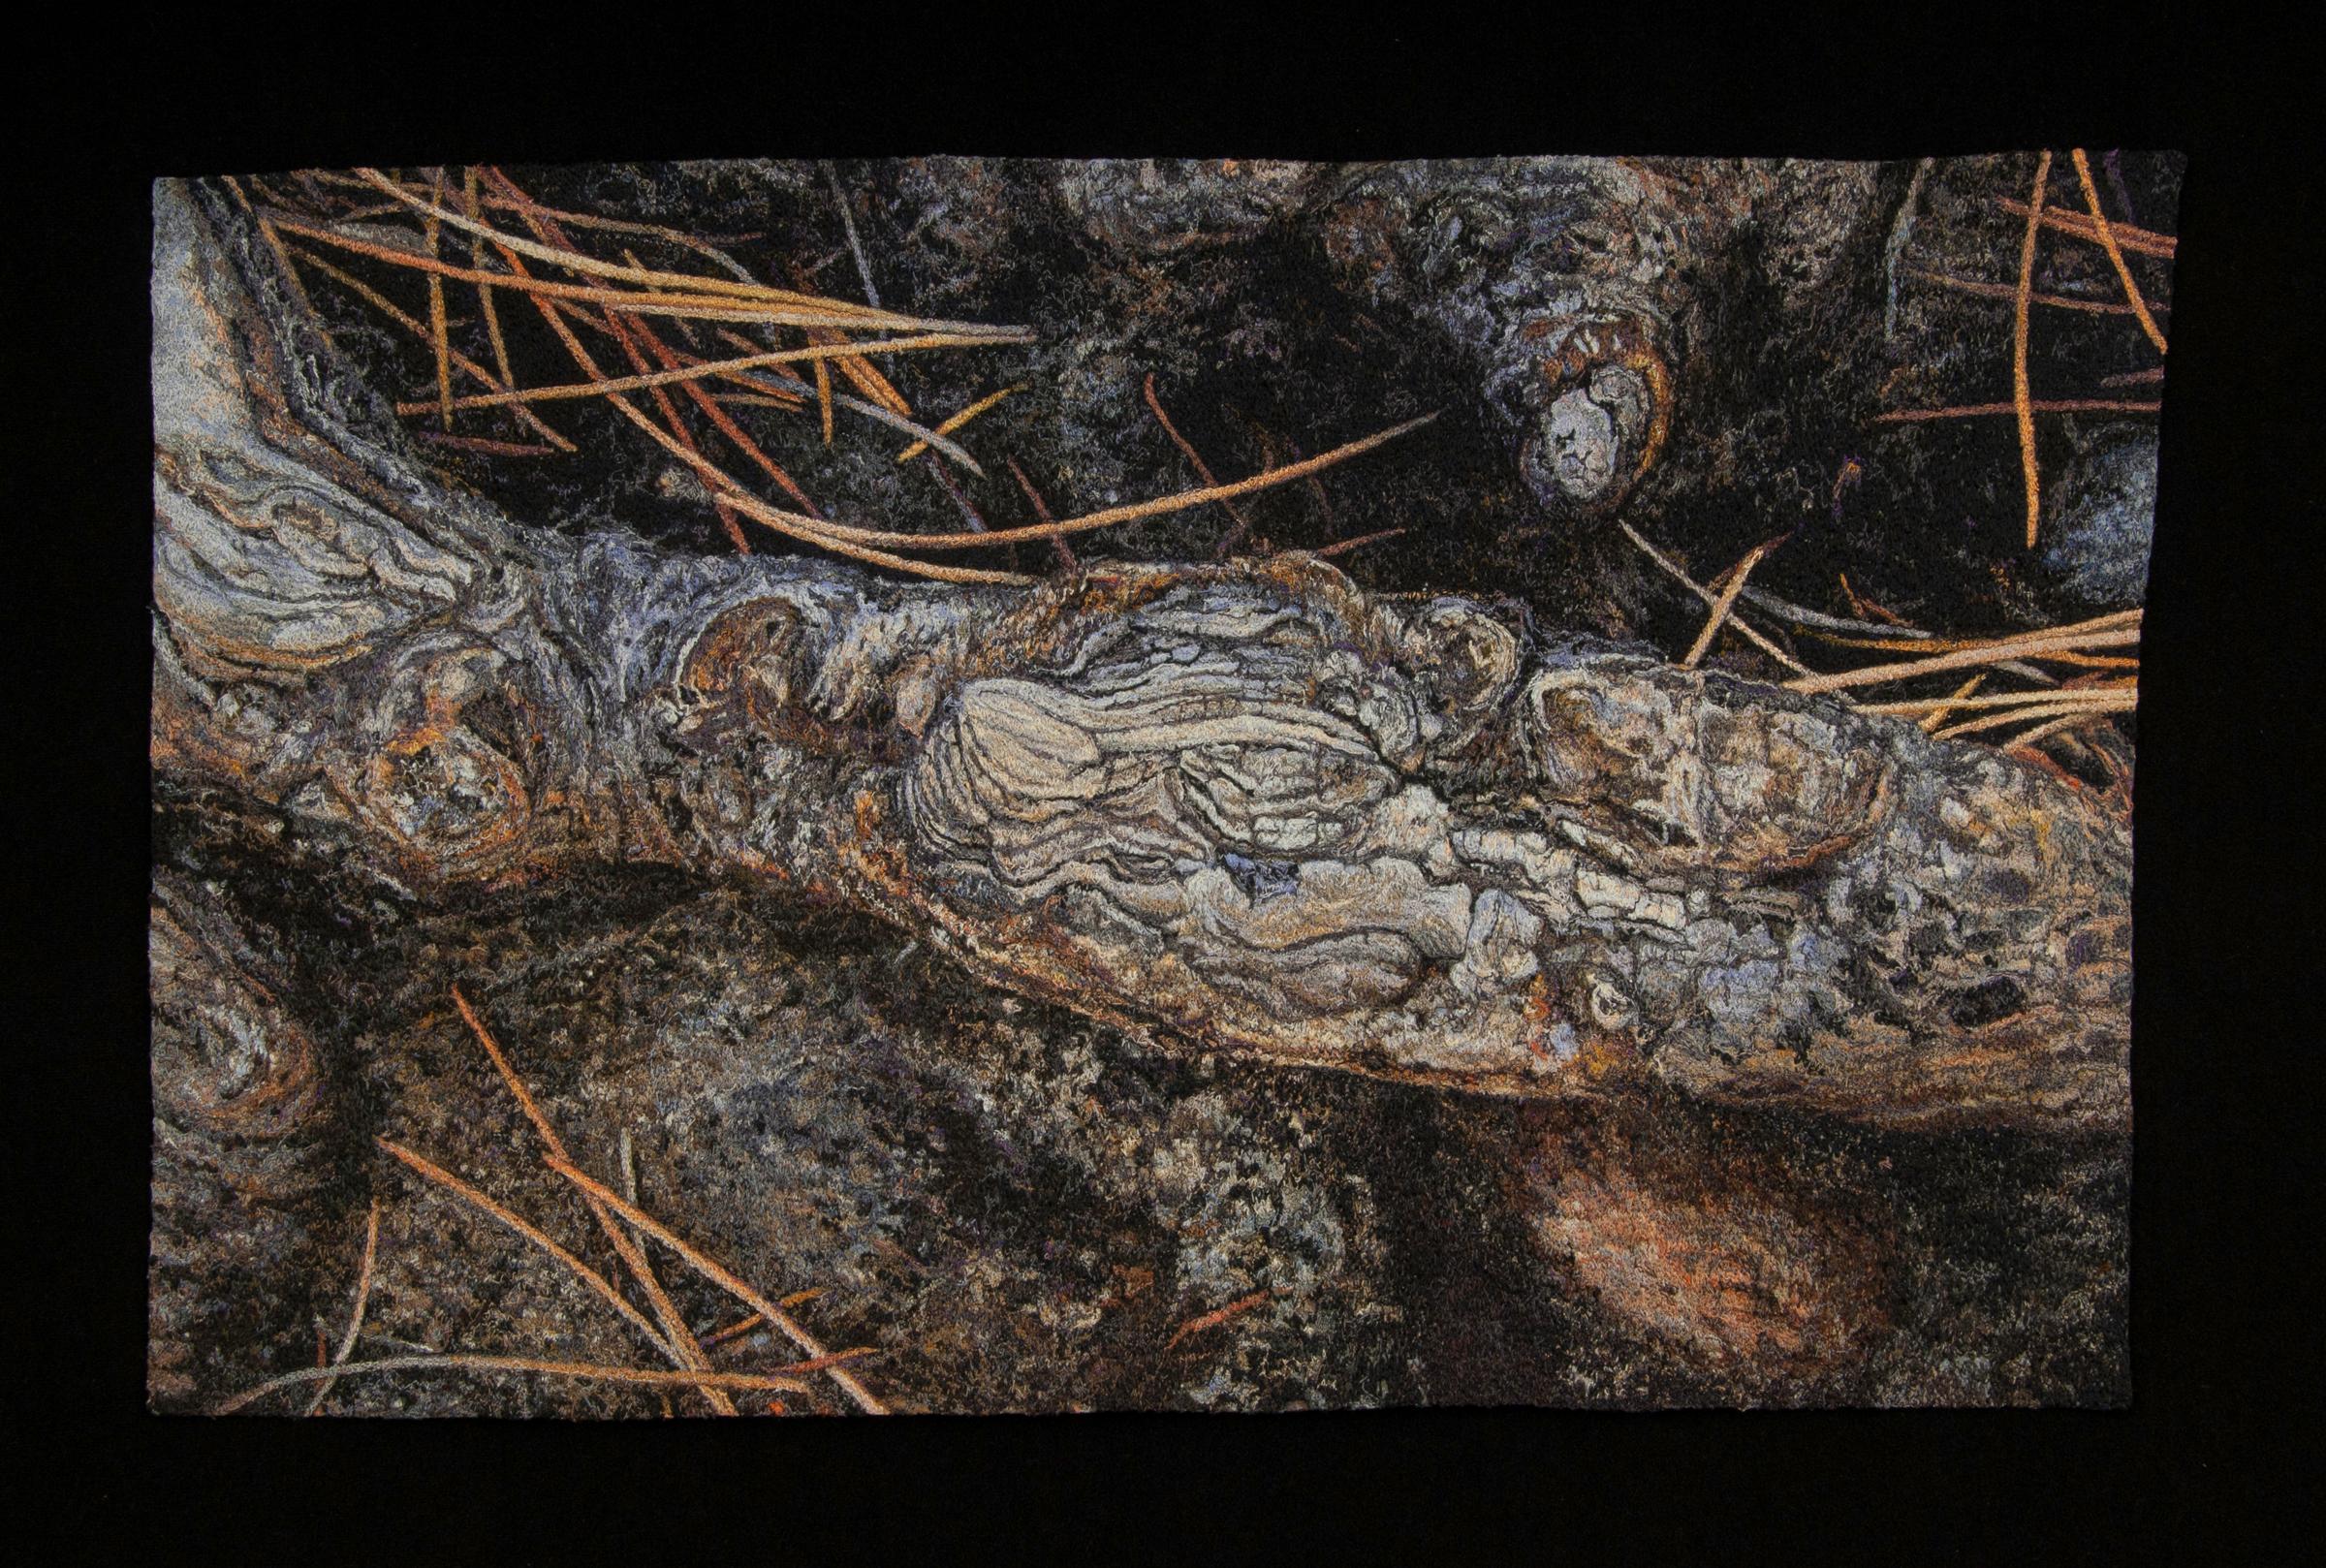 "Ponderosa Root", Contemporary, Photorealistic, Embroidery, Framed, Nature - Photograph by Carol Shinn